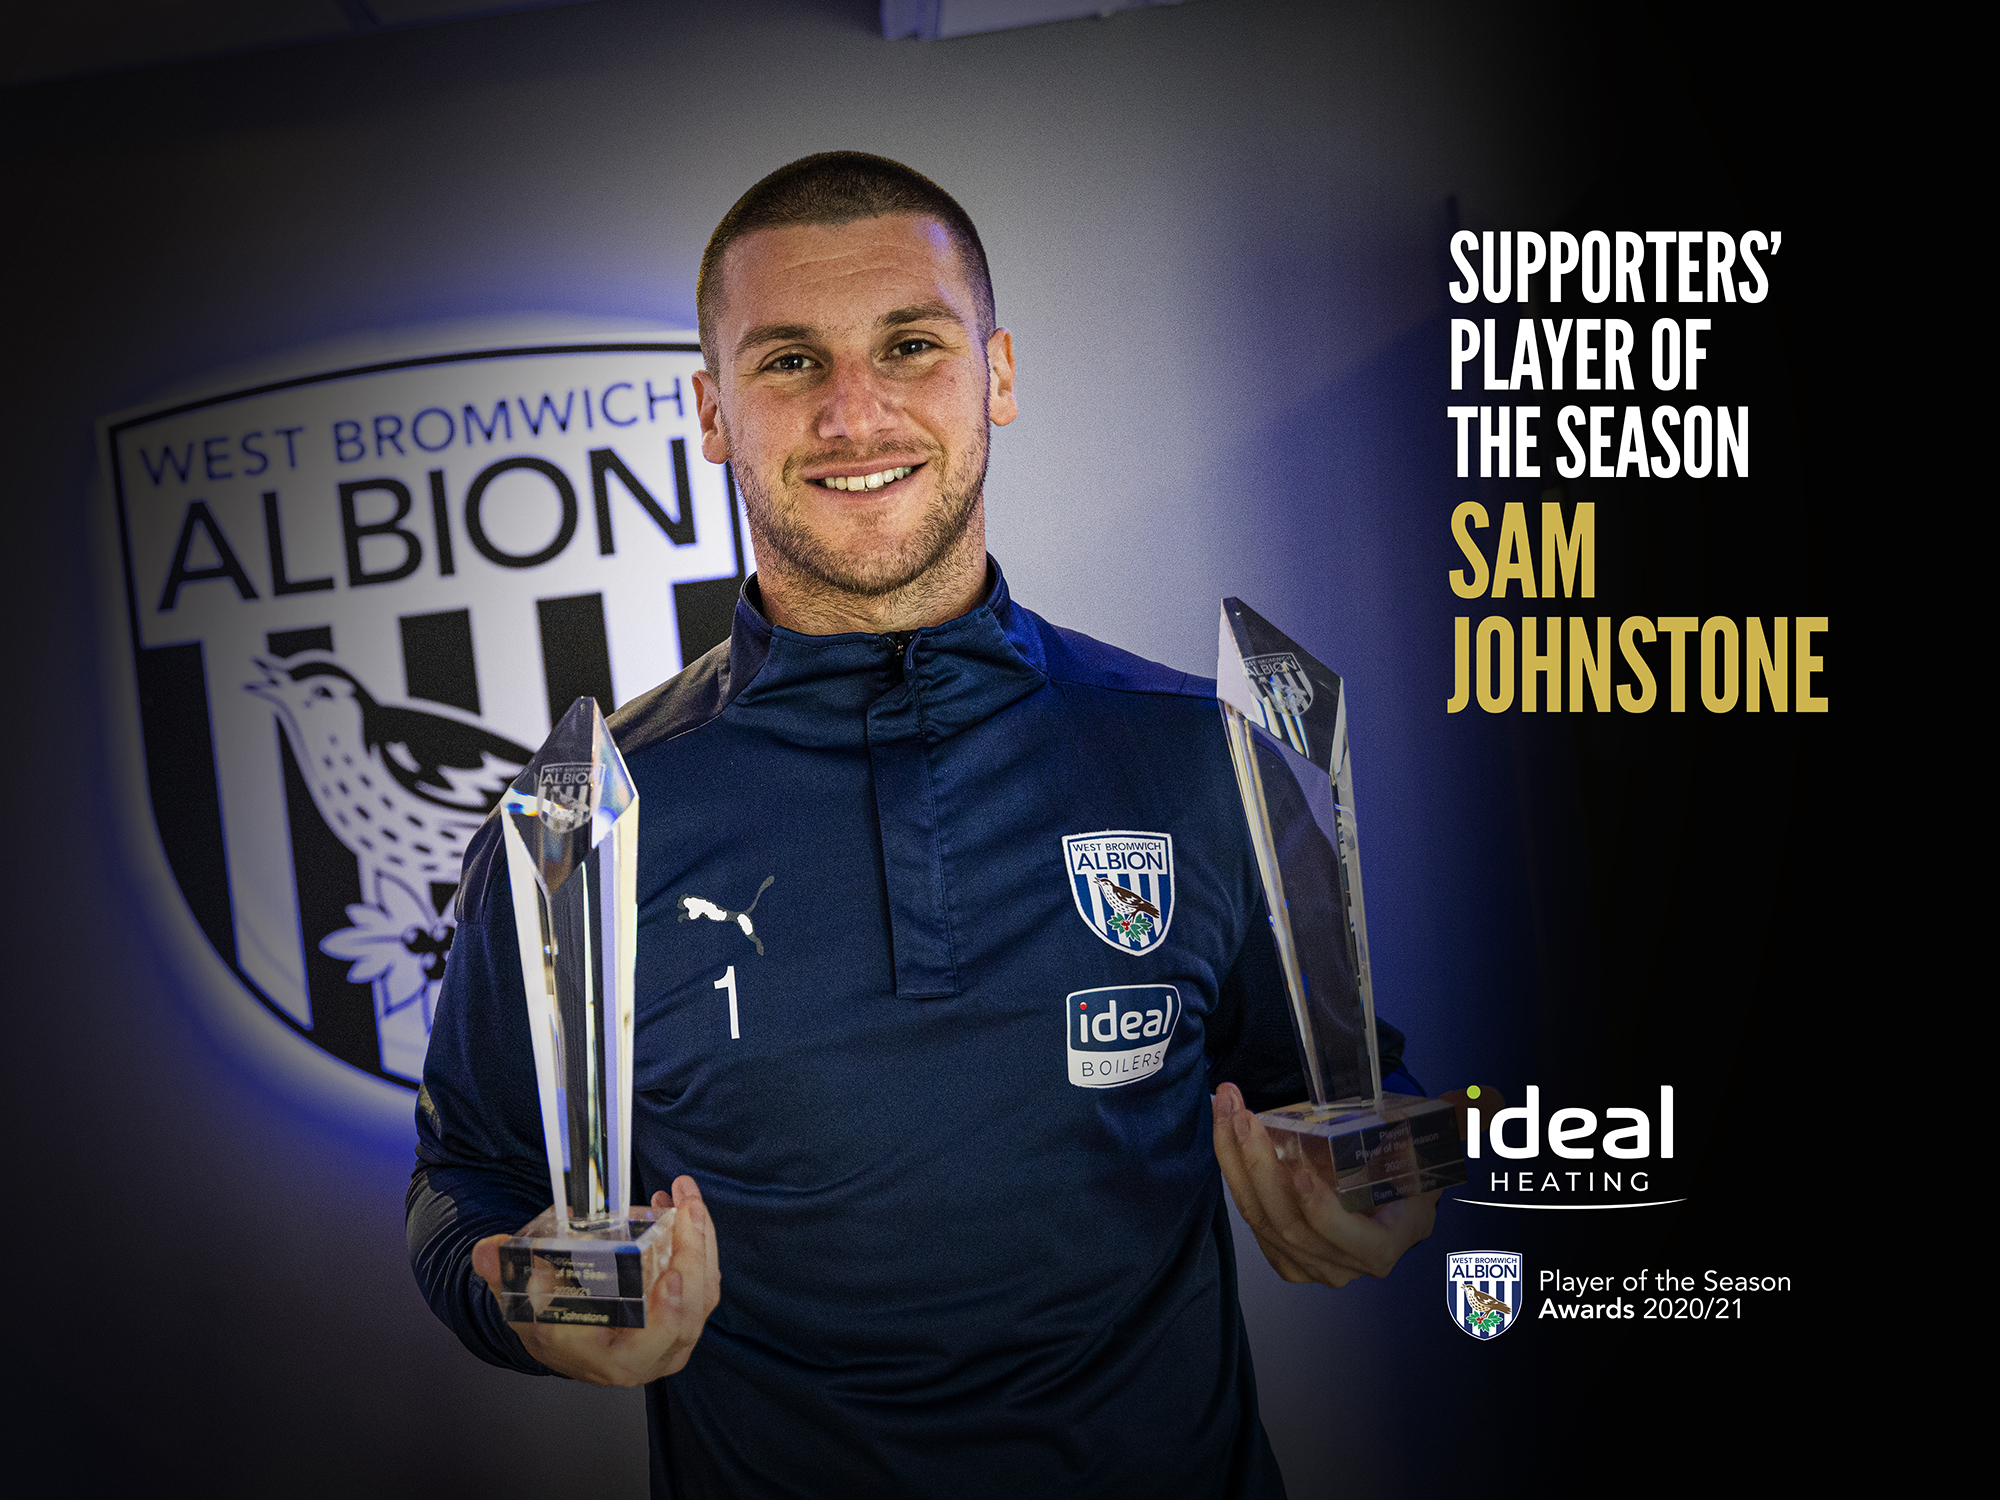 Supporters' Player of the Season award